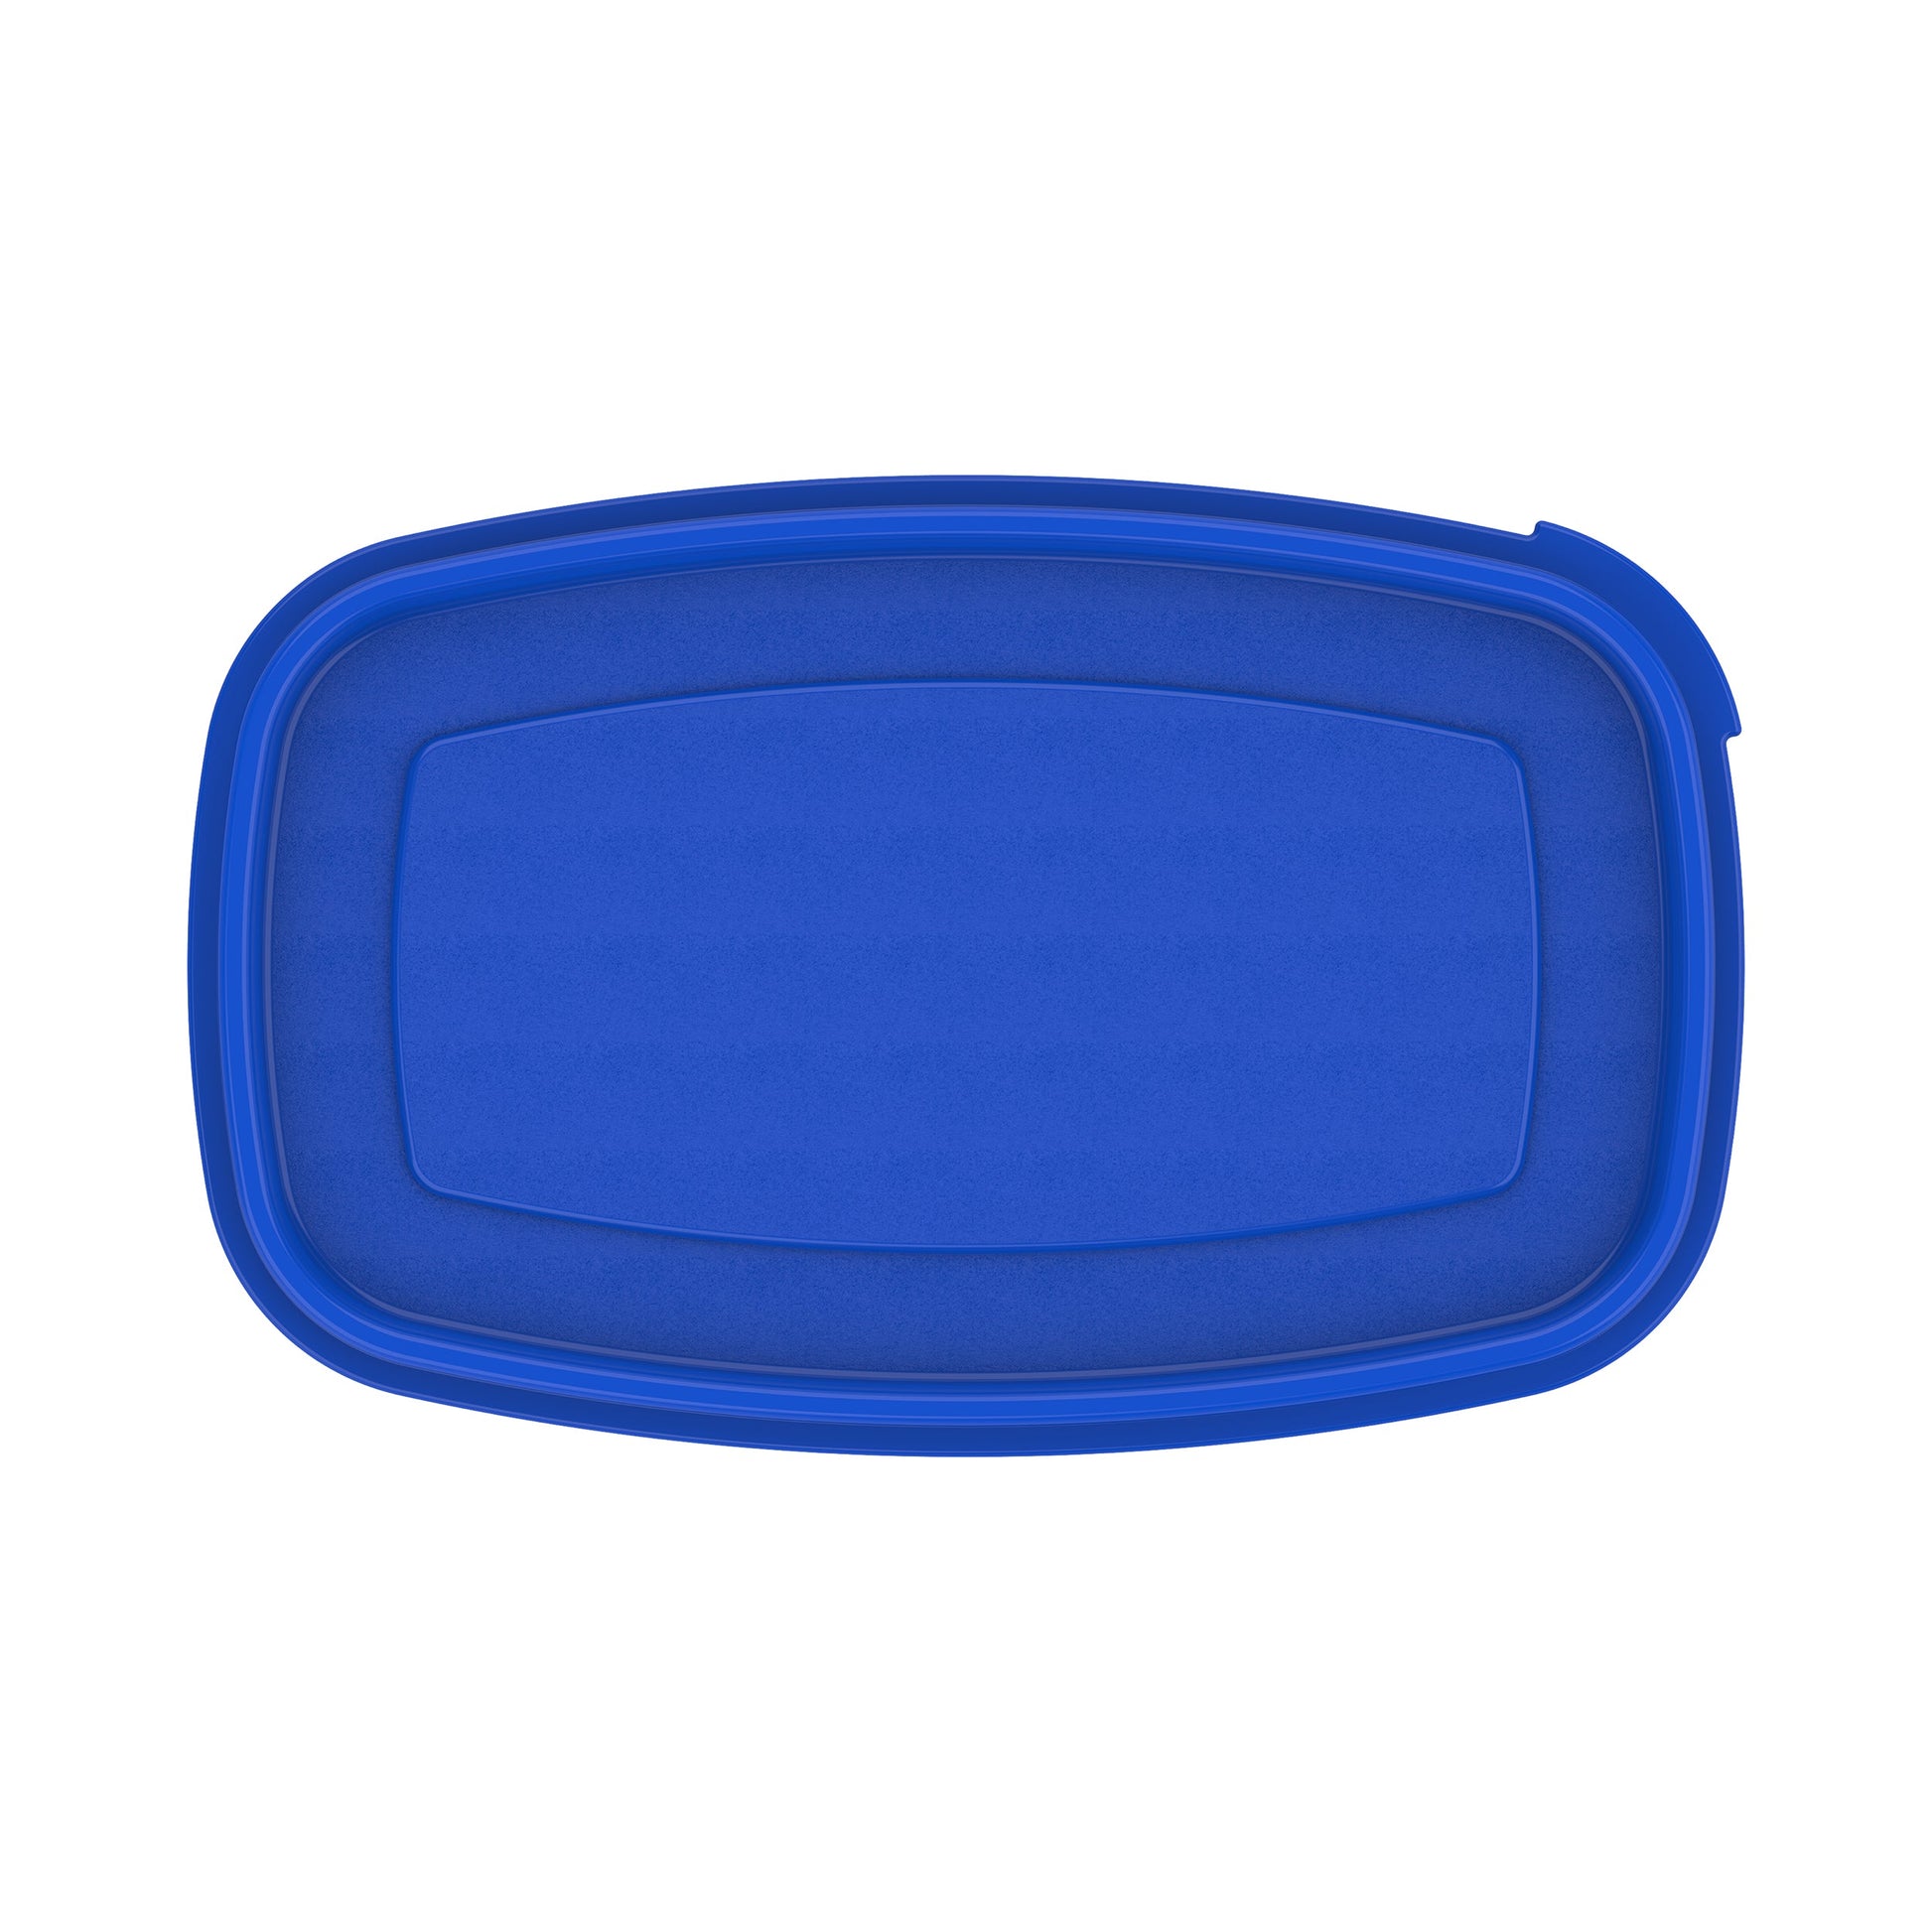 Oval Food Storage Containers Pack - Cosmoplast Kuwait